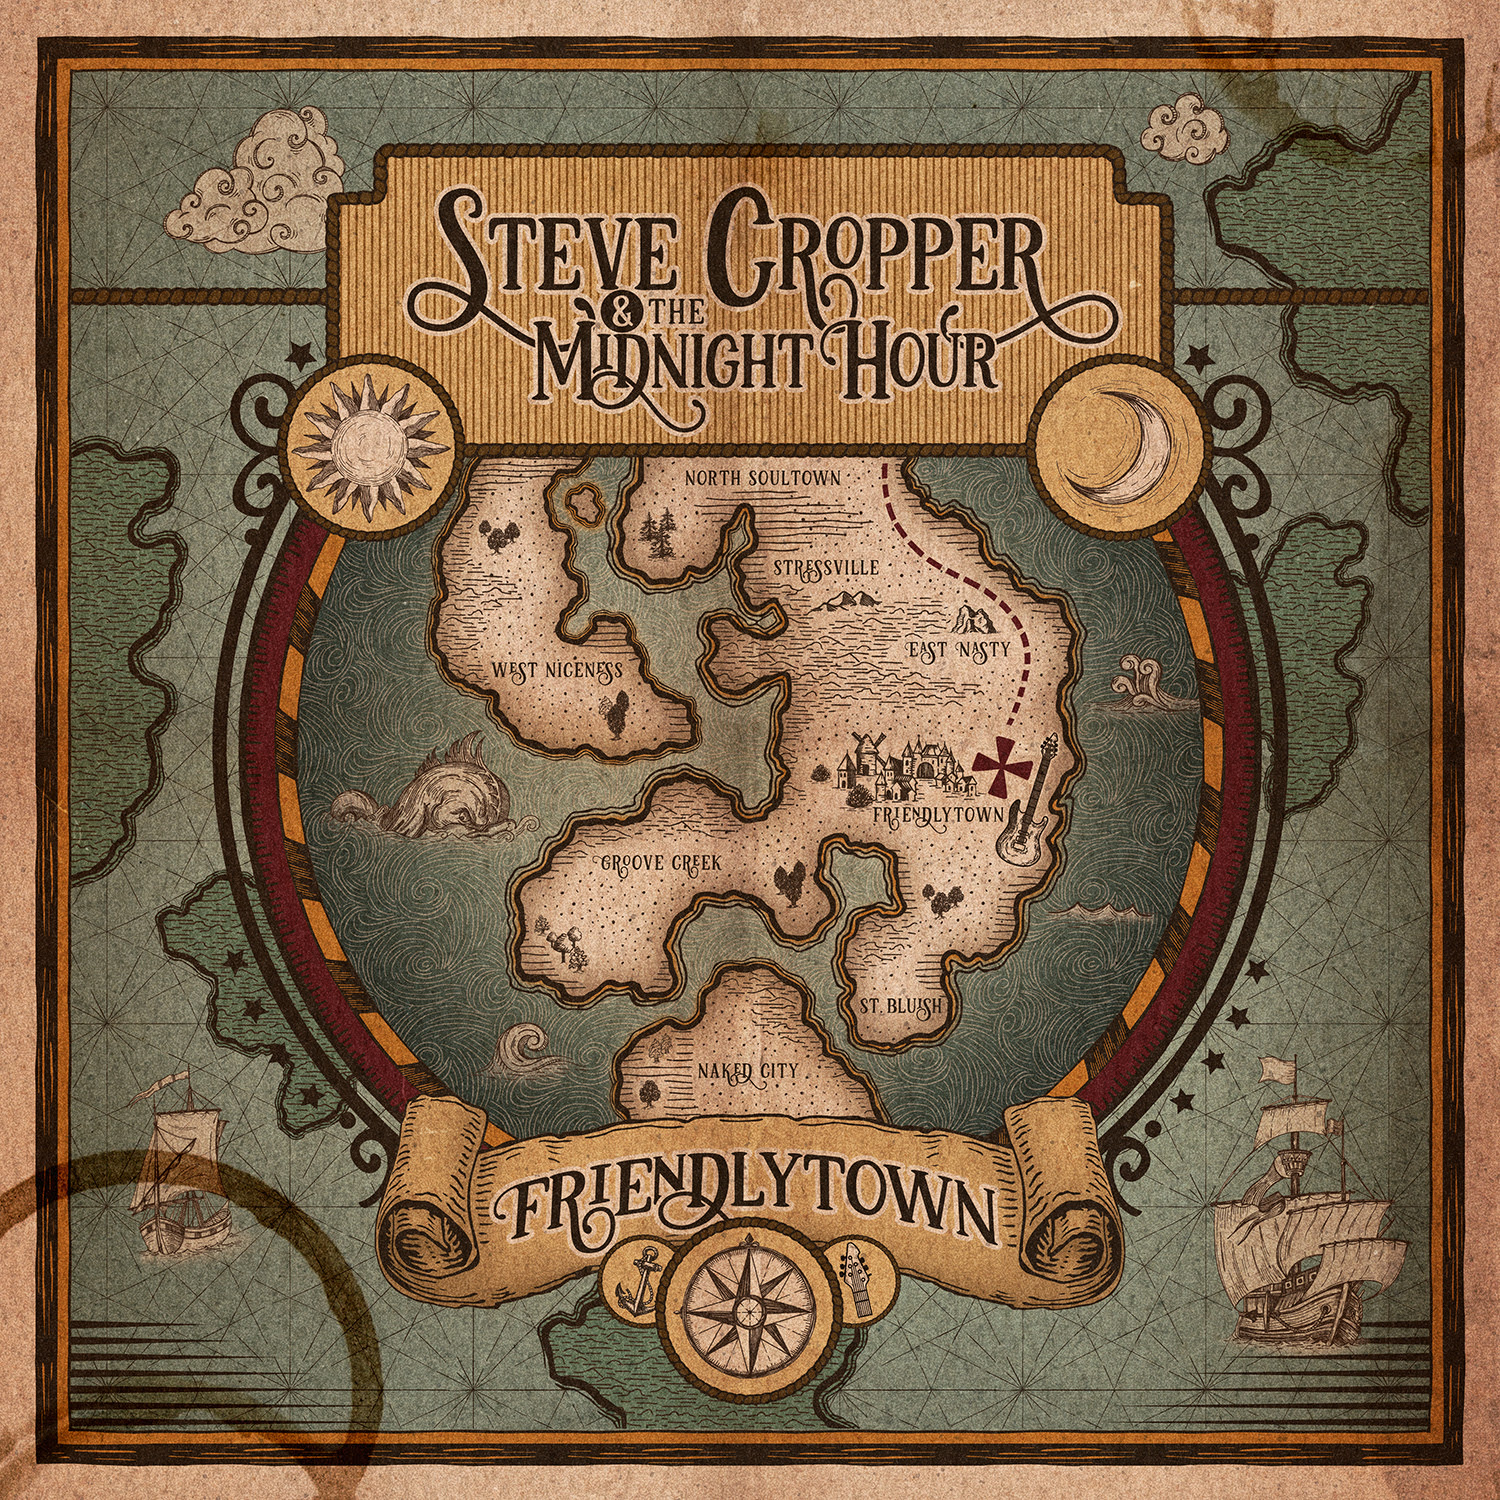 Legendary Guitarist Steve Cropper Announces New Album w/ Billy Gibbons, Brian May, and Tim Montana